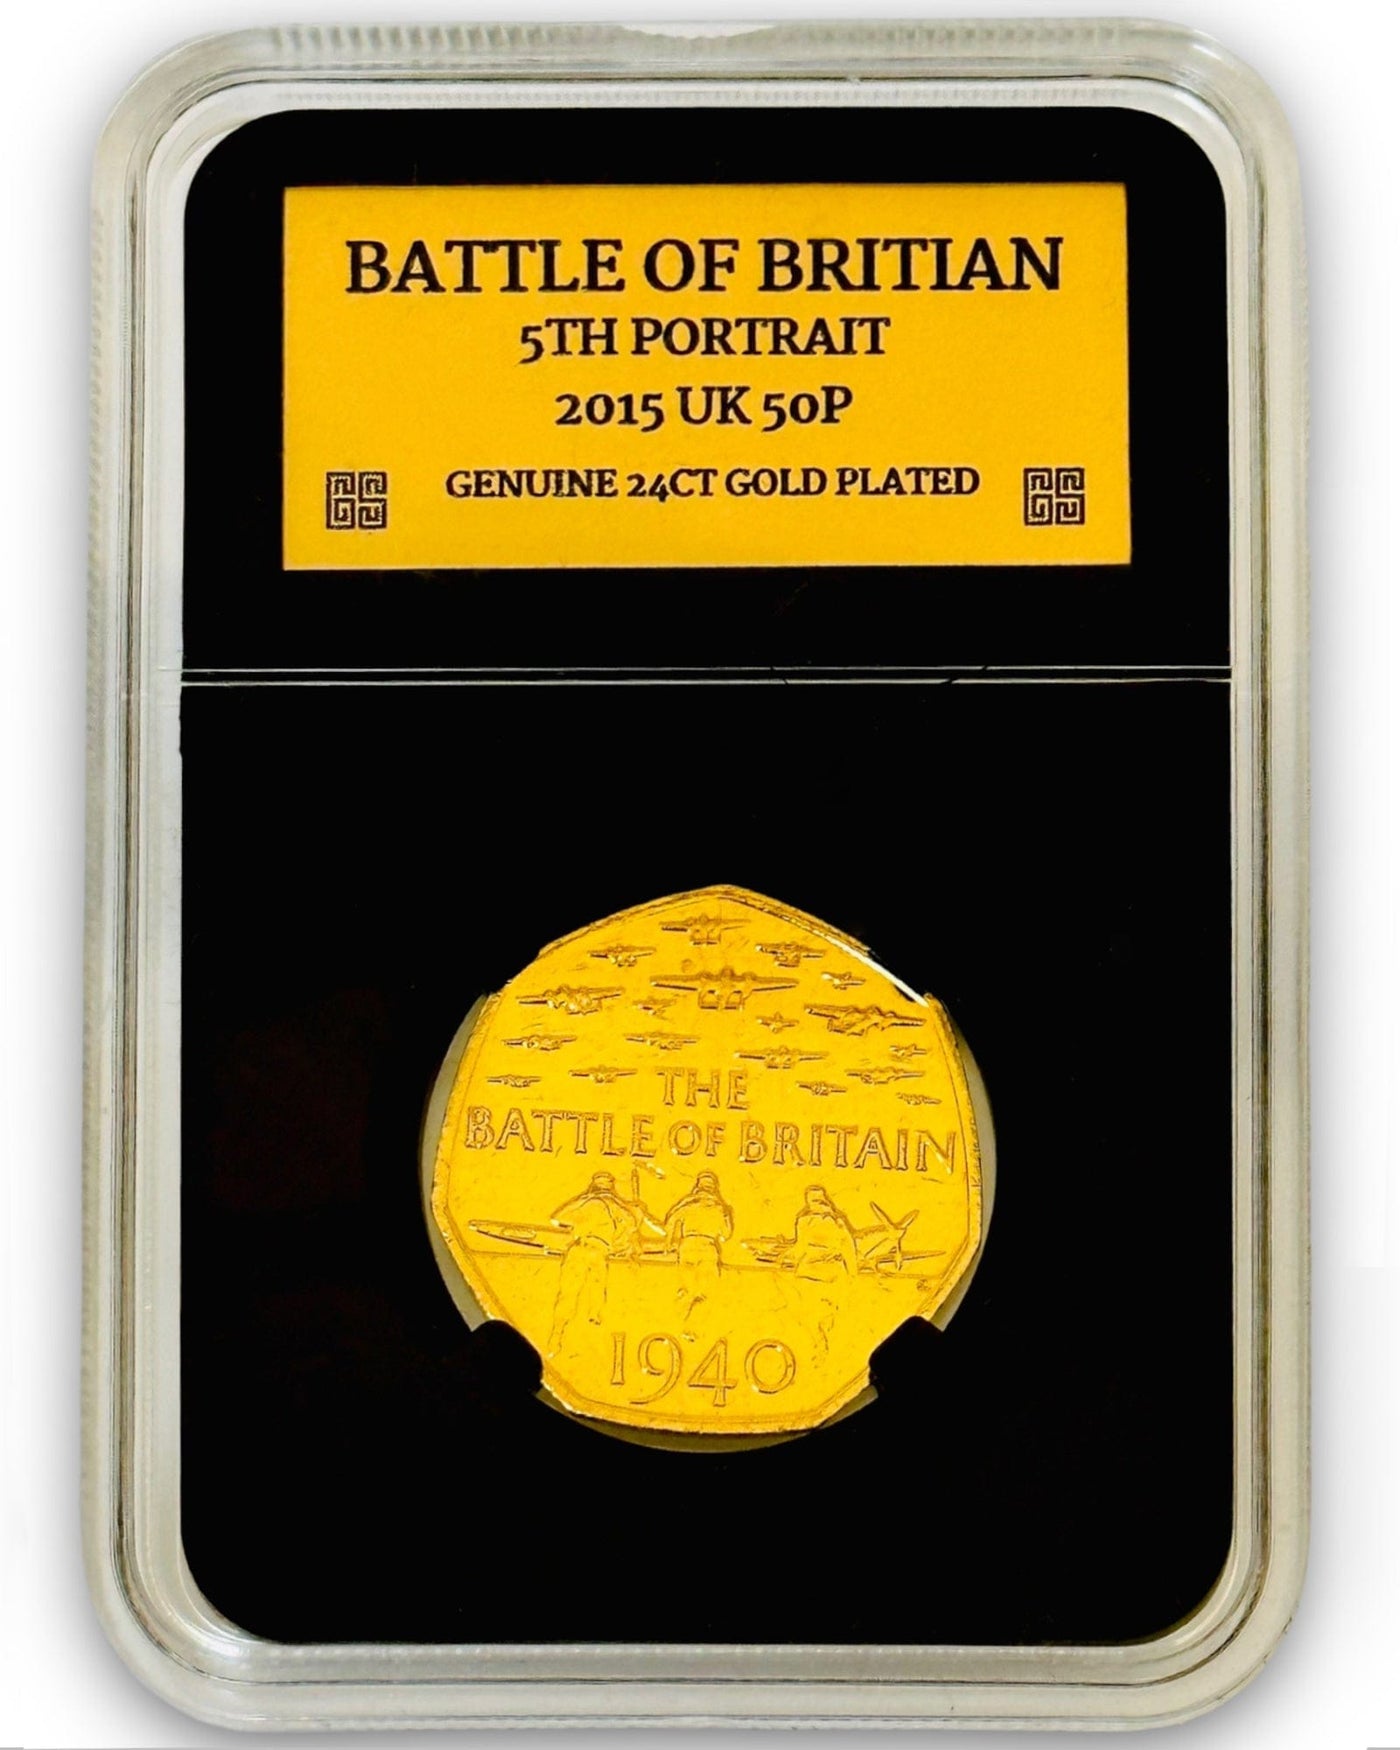 24ct Gold Plated Battle Of Britain 2015 50p Coin In Case